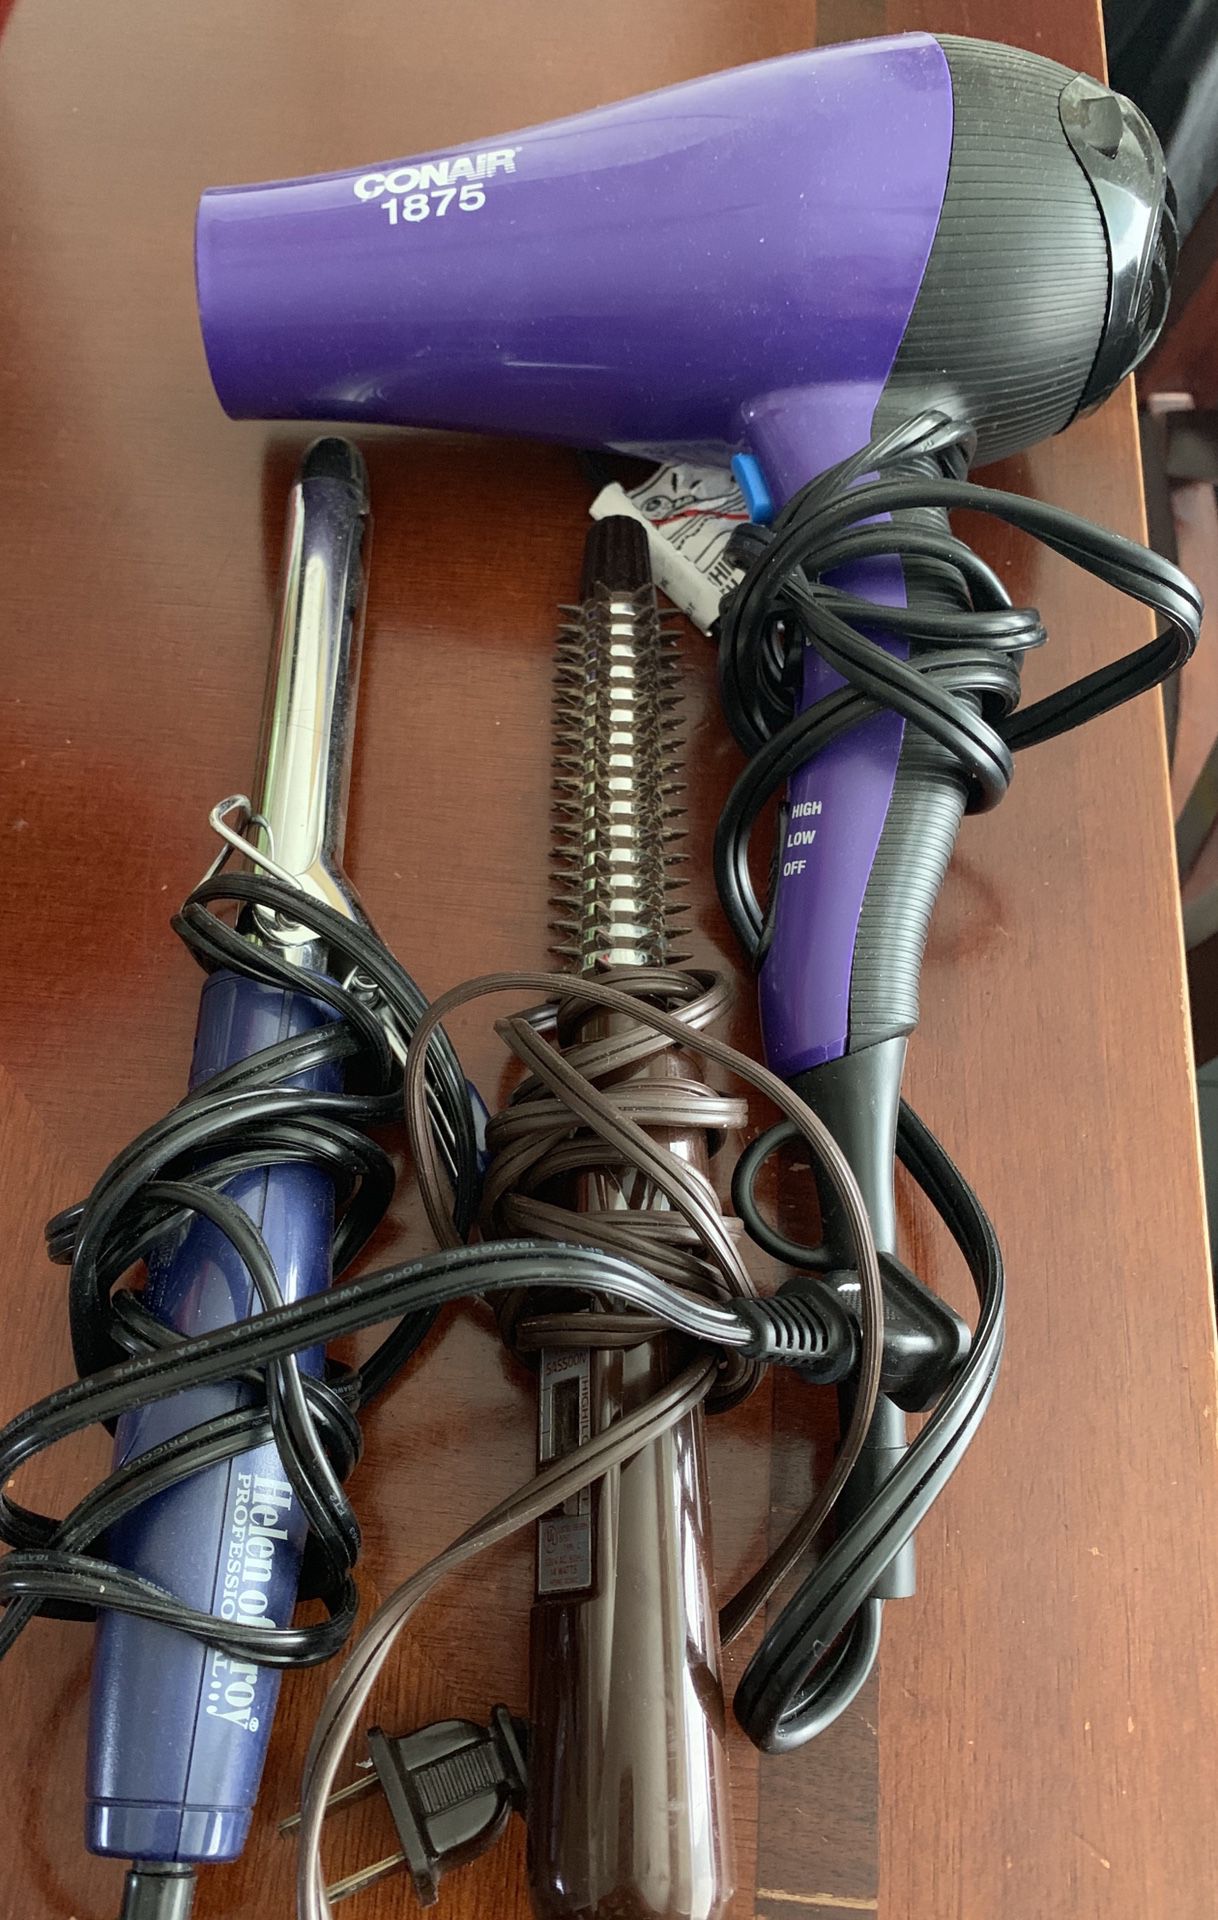 Hair dryer and curling irons